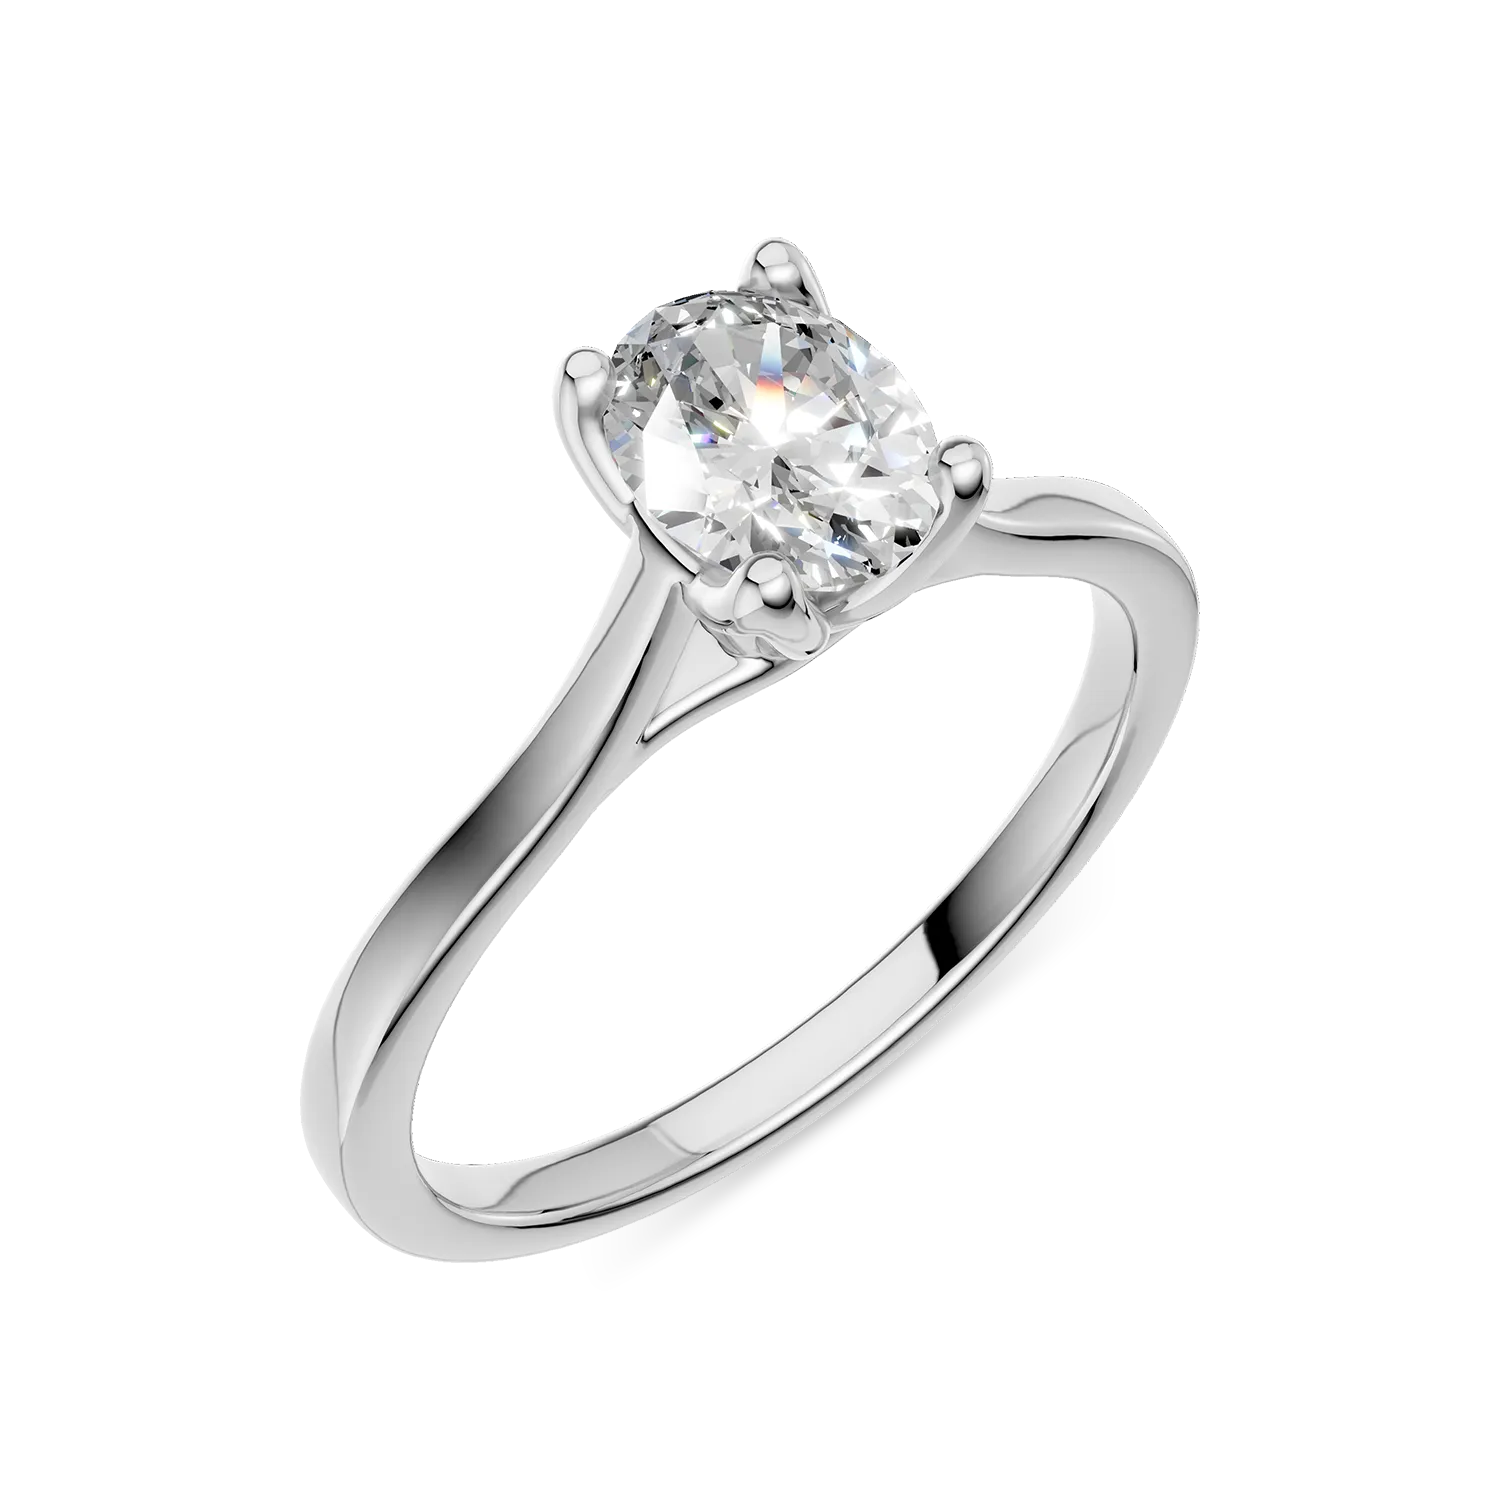 White gold Lotus engagement ring with a 0.5ct solitaire lab grown diamond